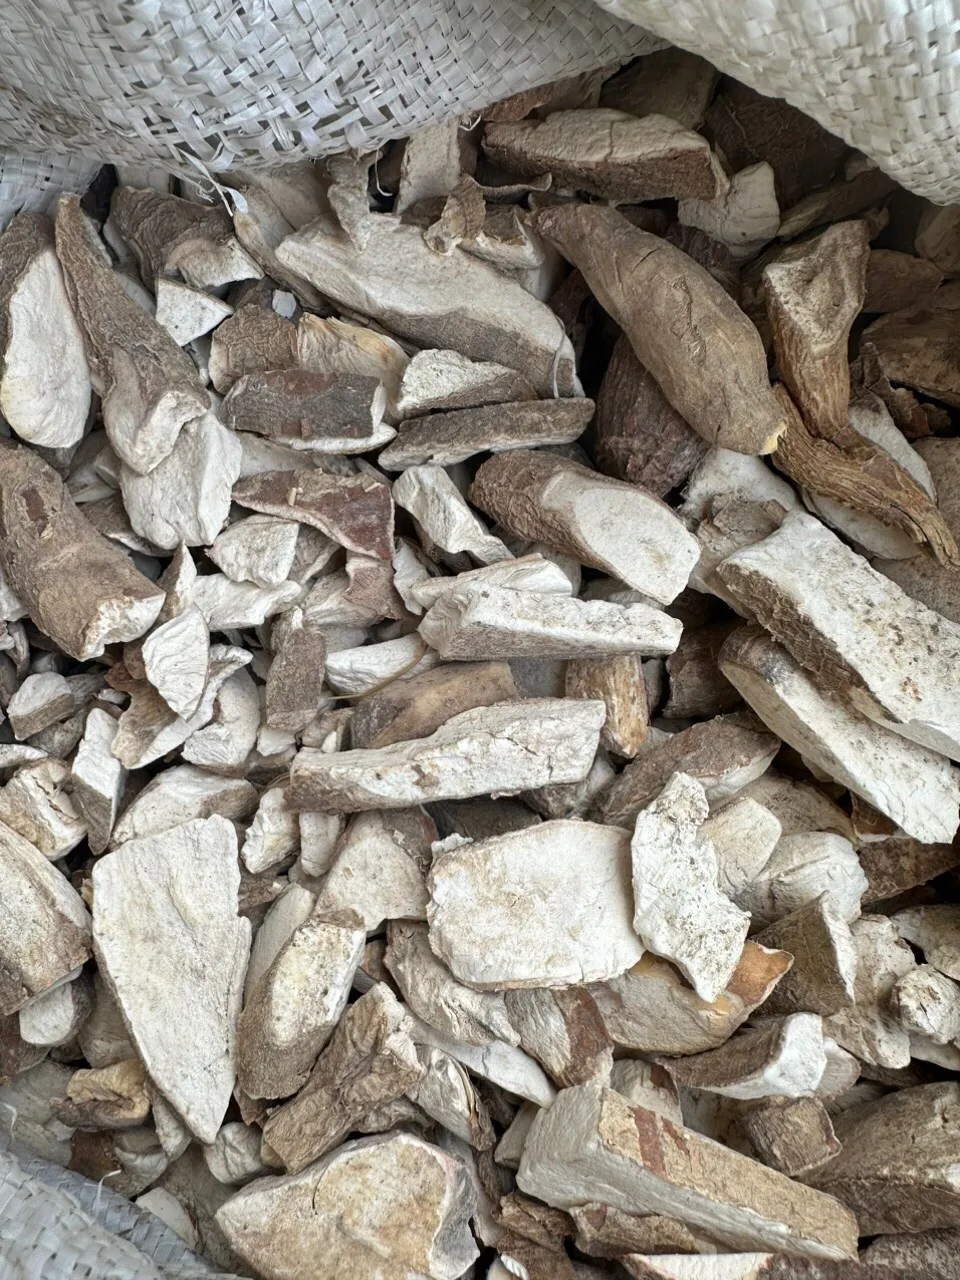 Low Price Dried Cassava Tapioca Chips High Quality Best Price Sliced Cassava for Animal Feed Making Animal Food